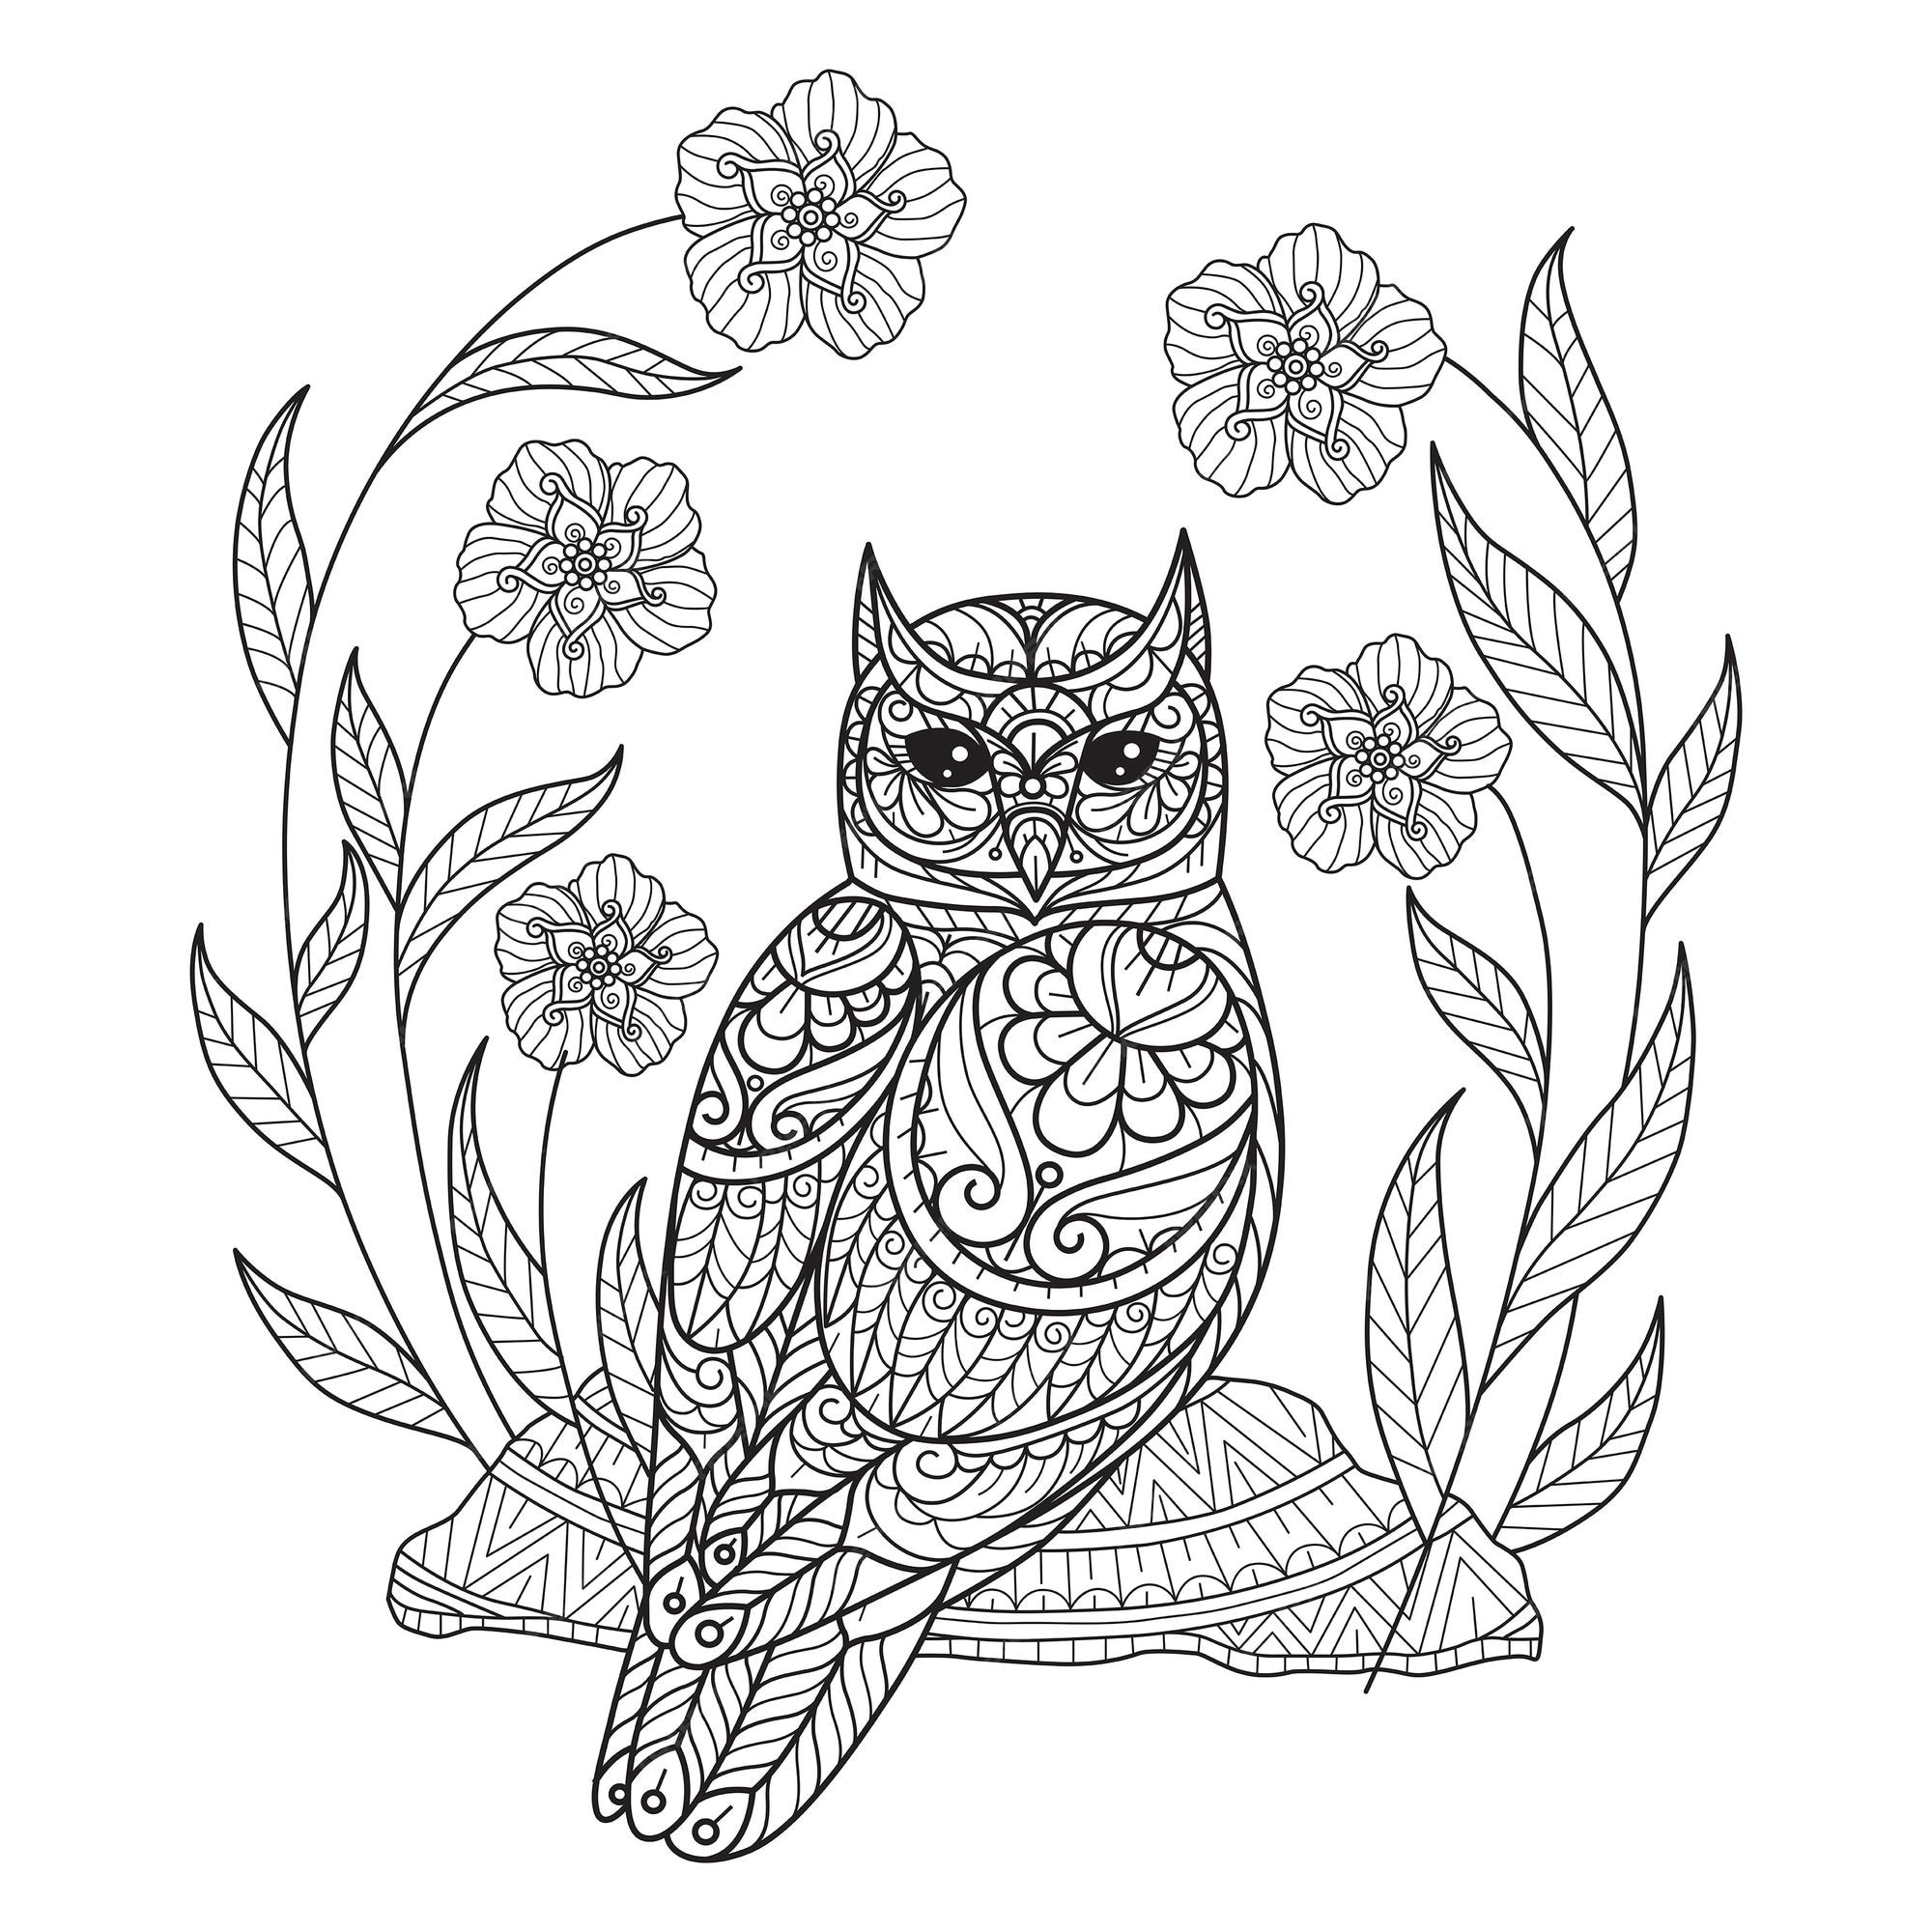 Premium vector owl and flowers hand drawn for adult coloring book